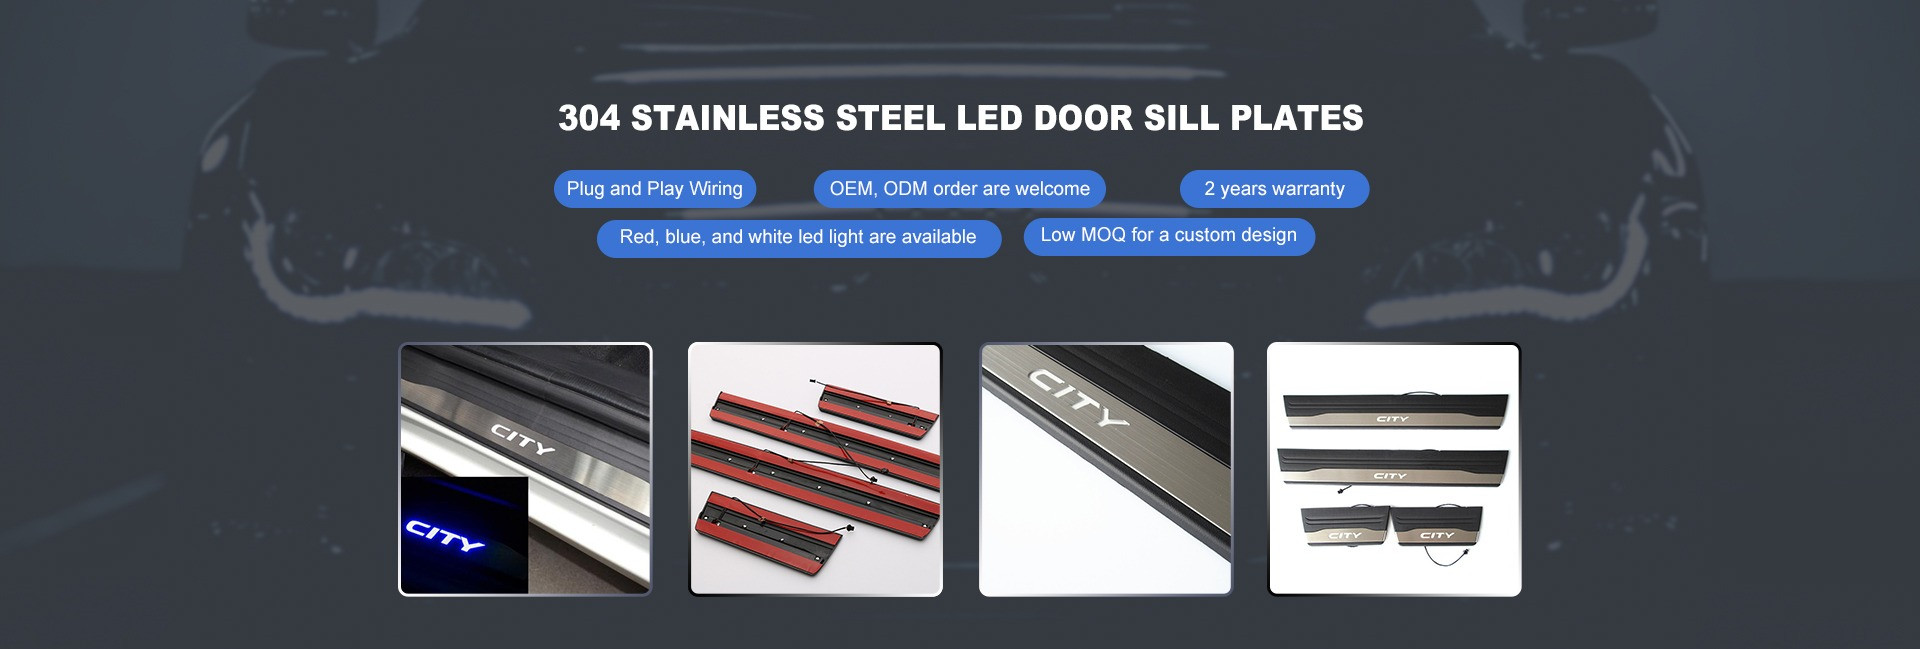 304 stainless steel led door sill plates